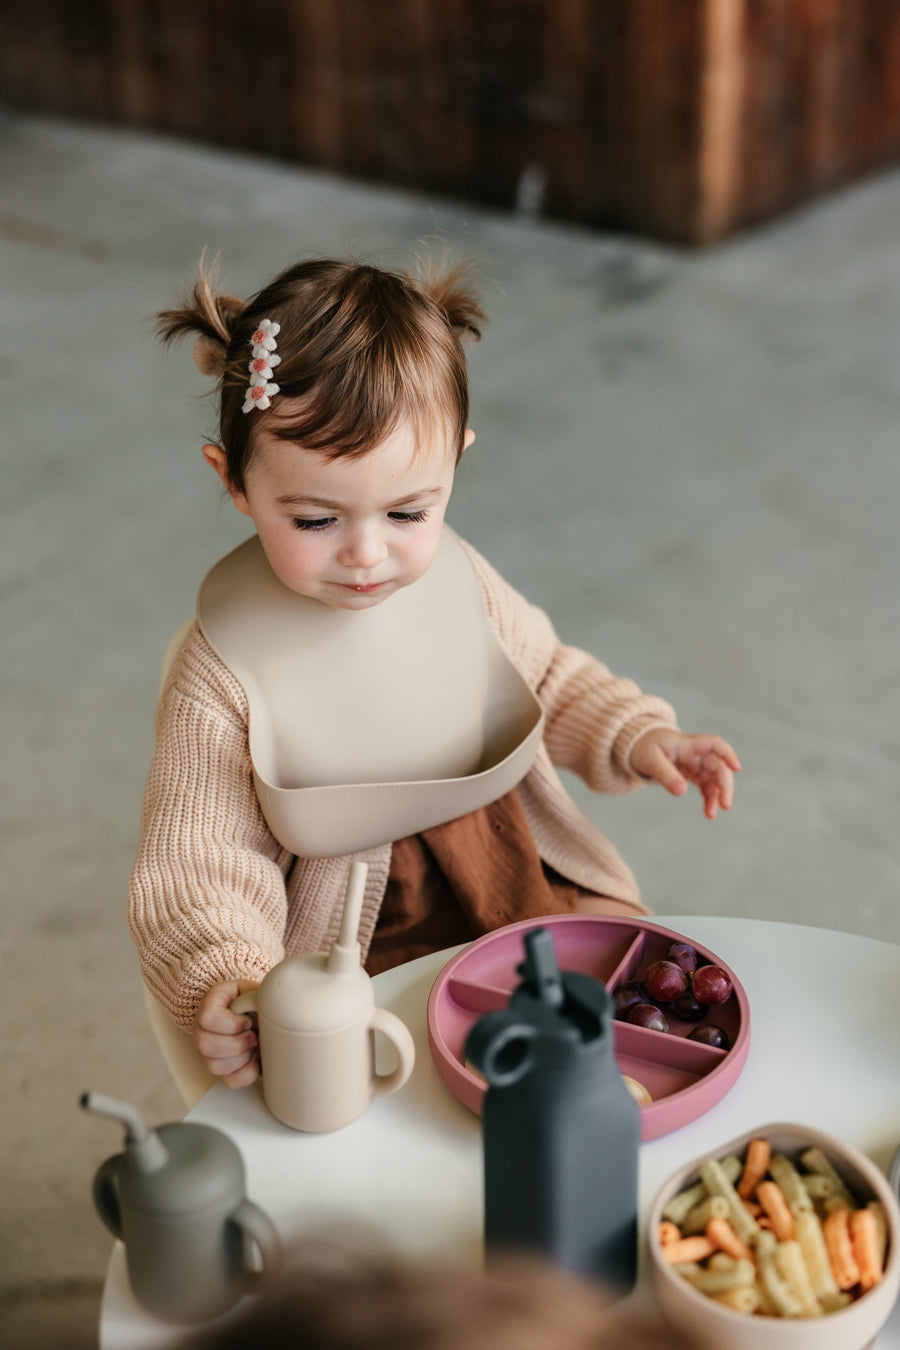 Ochre Silicone Toddler Cup